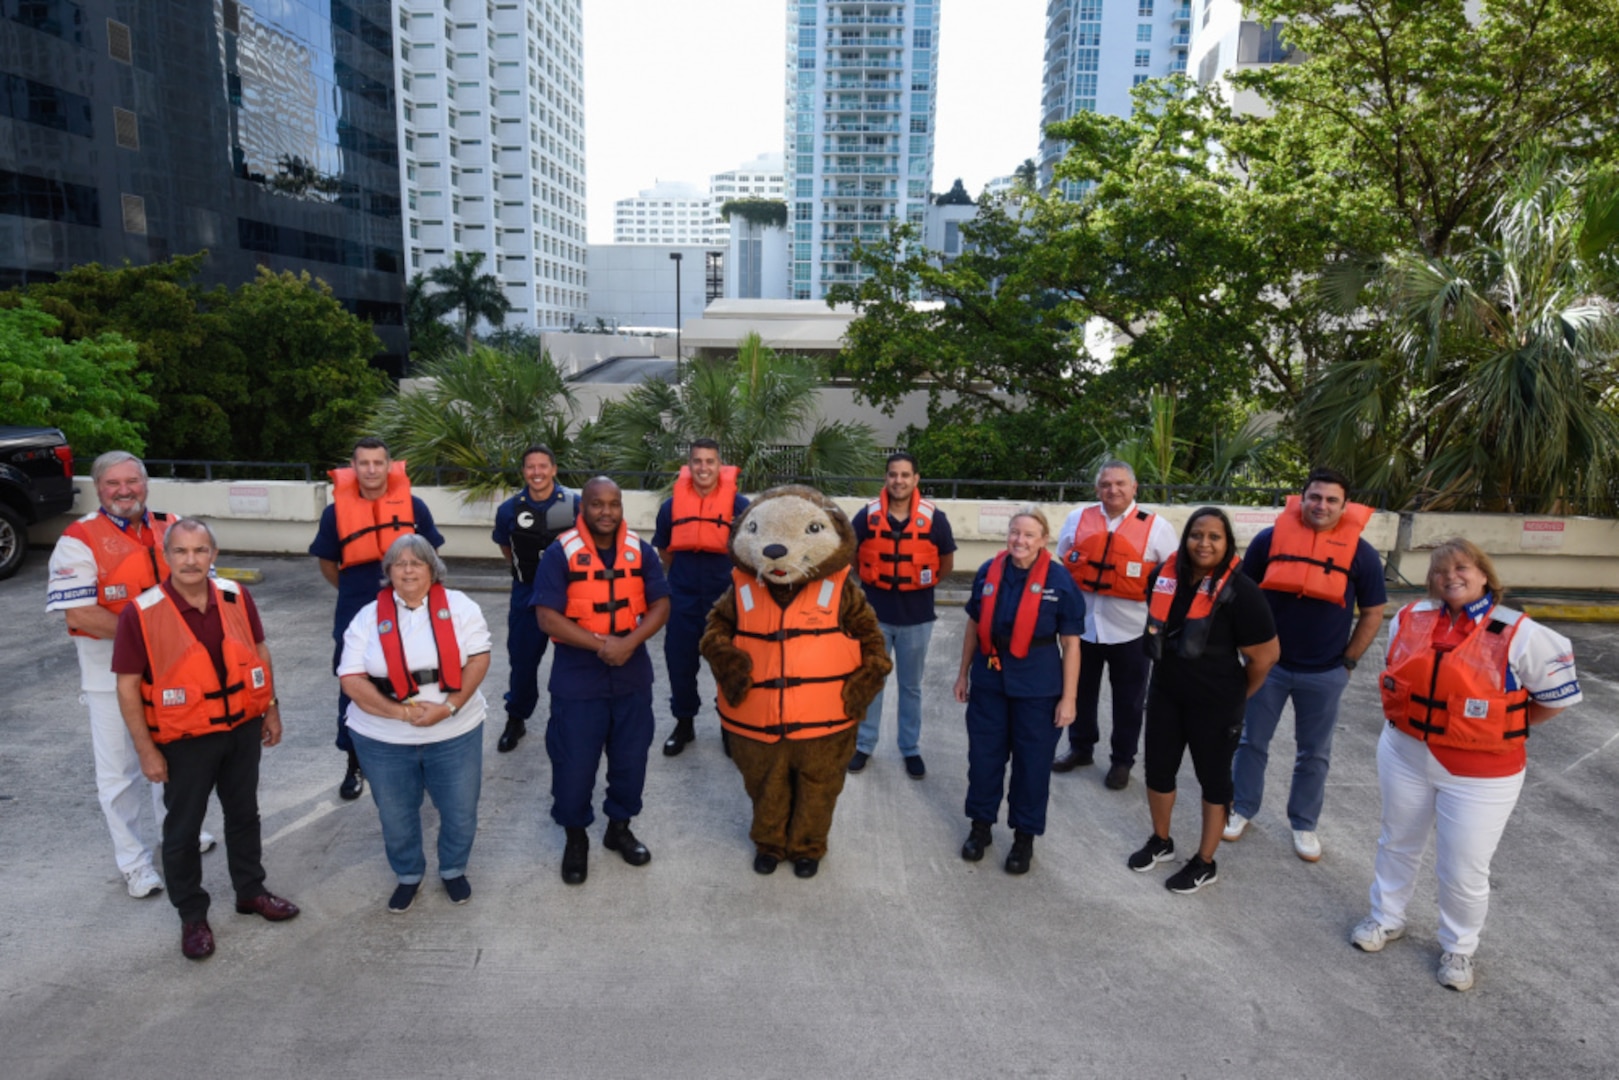 Members of the Coast Guard District Seven wear their life jackets in support of Wear Your Life Jacket at Work Day in Miami, Florida, May 21, 2021. This event marks the start of National Safe Boating Week which helps raise boating safety awareness. (U.S. Coast Guard photo by Petty Officer 3rd Class Jose Hernandez)